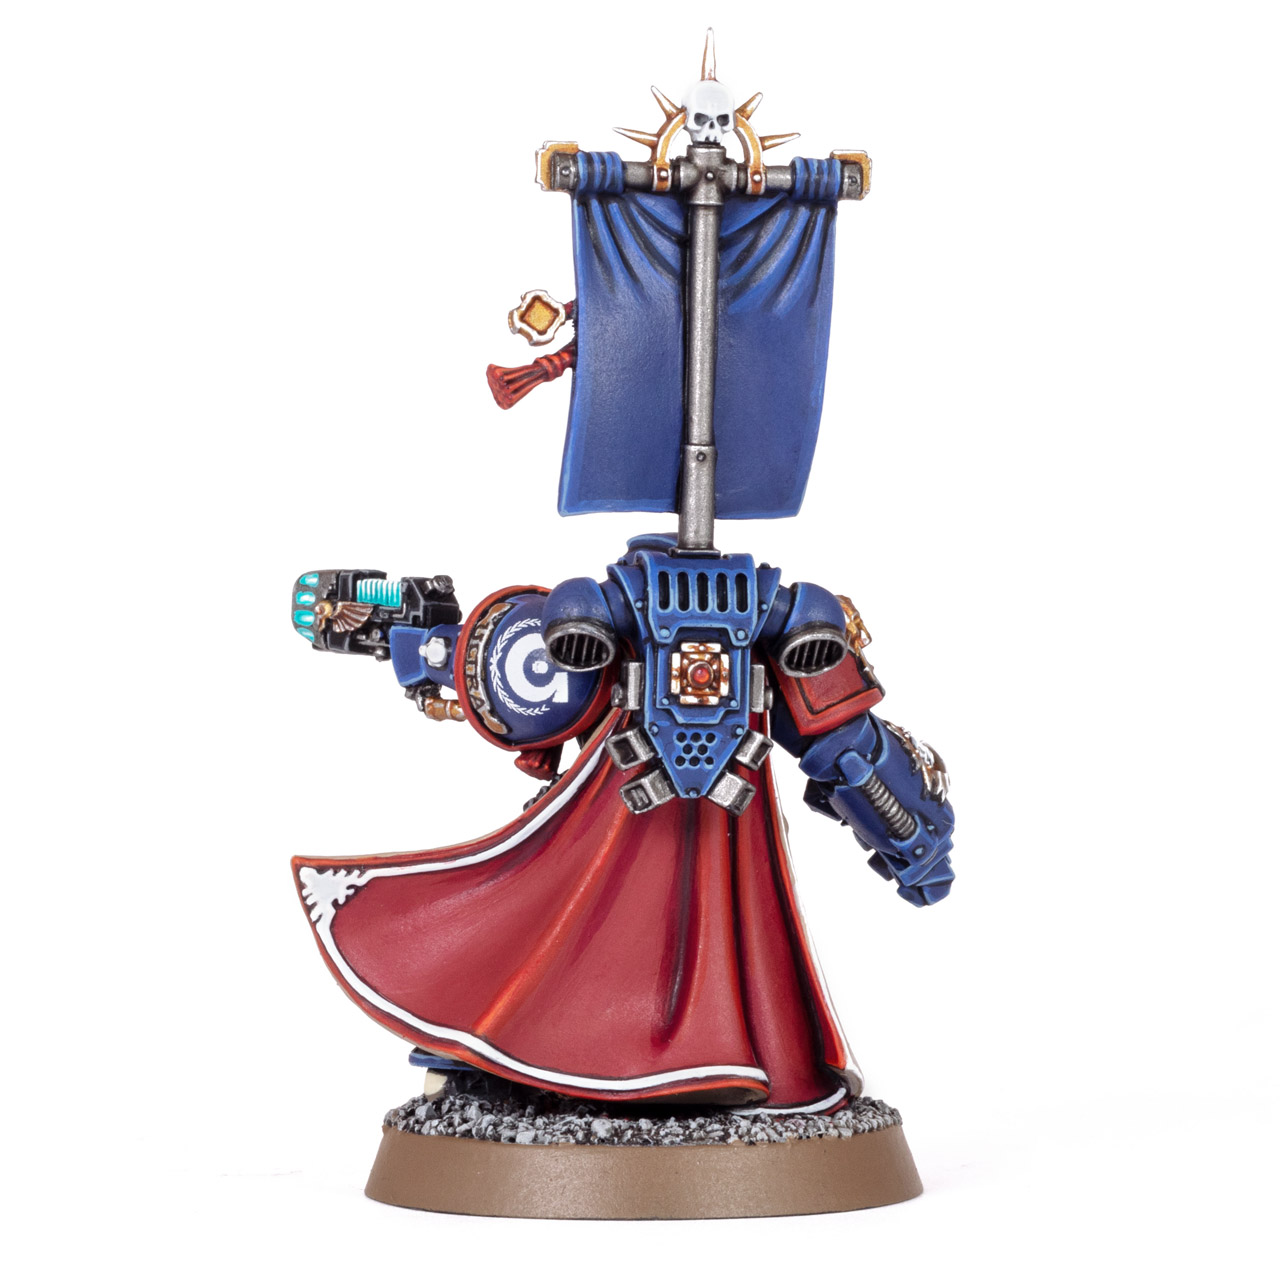 Back view of Captain Mikael Fabian from the Ultramarines 3rd Company, painted by Stahly